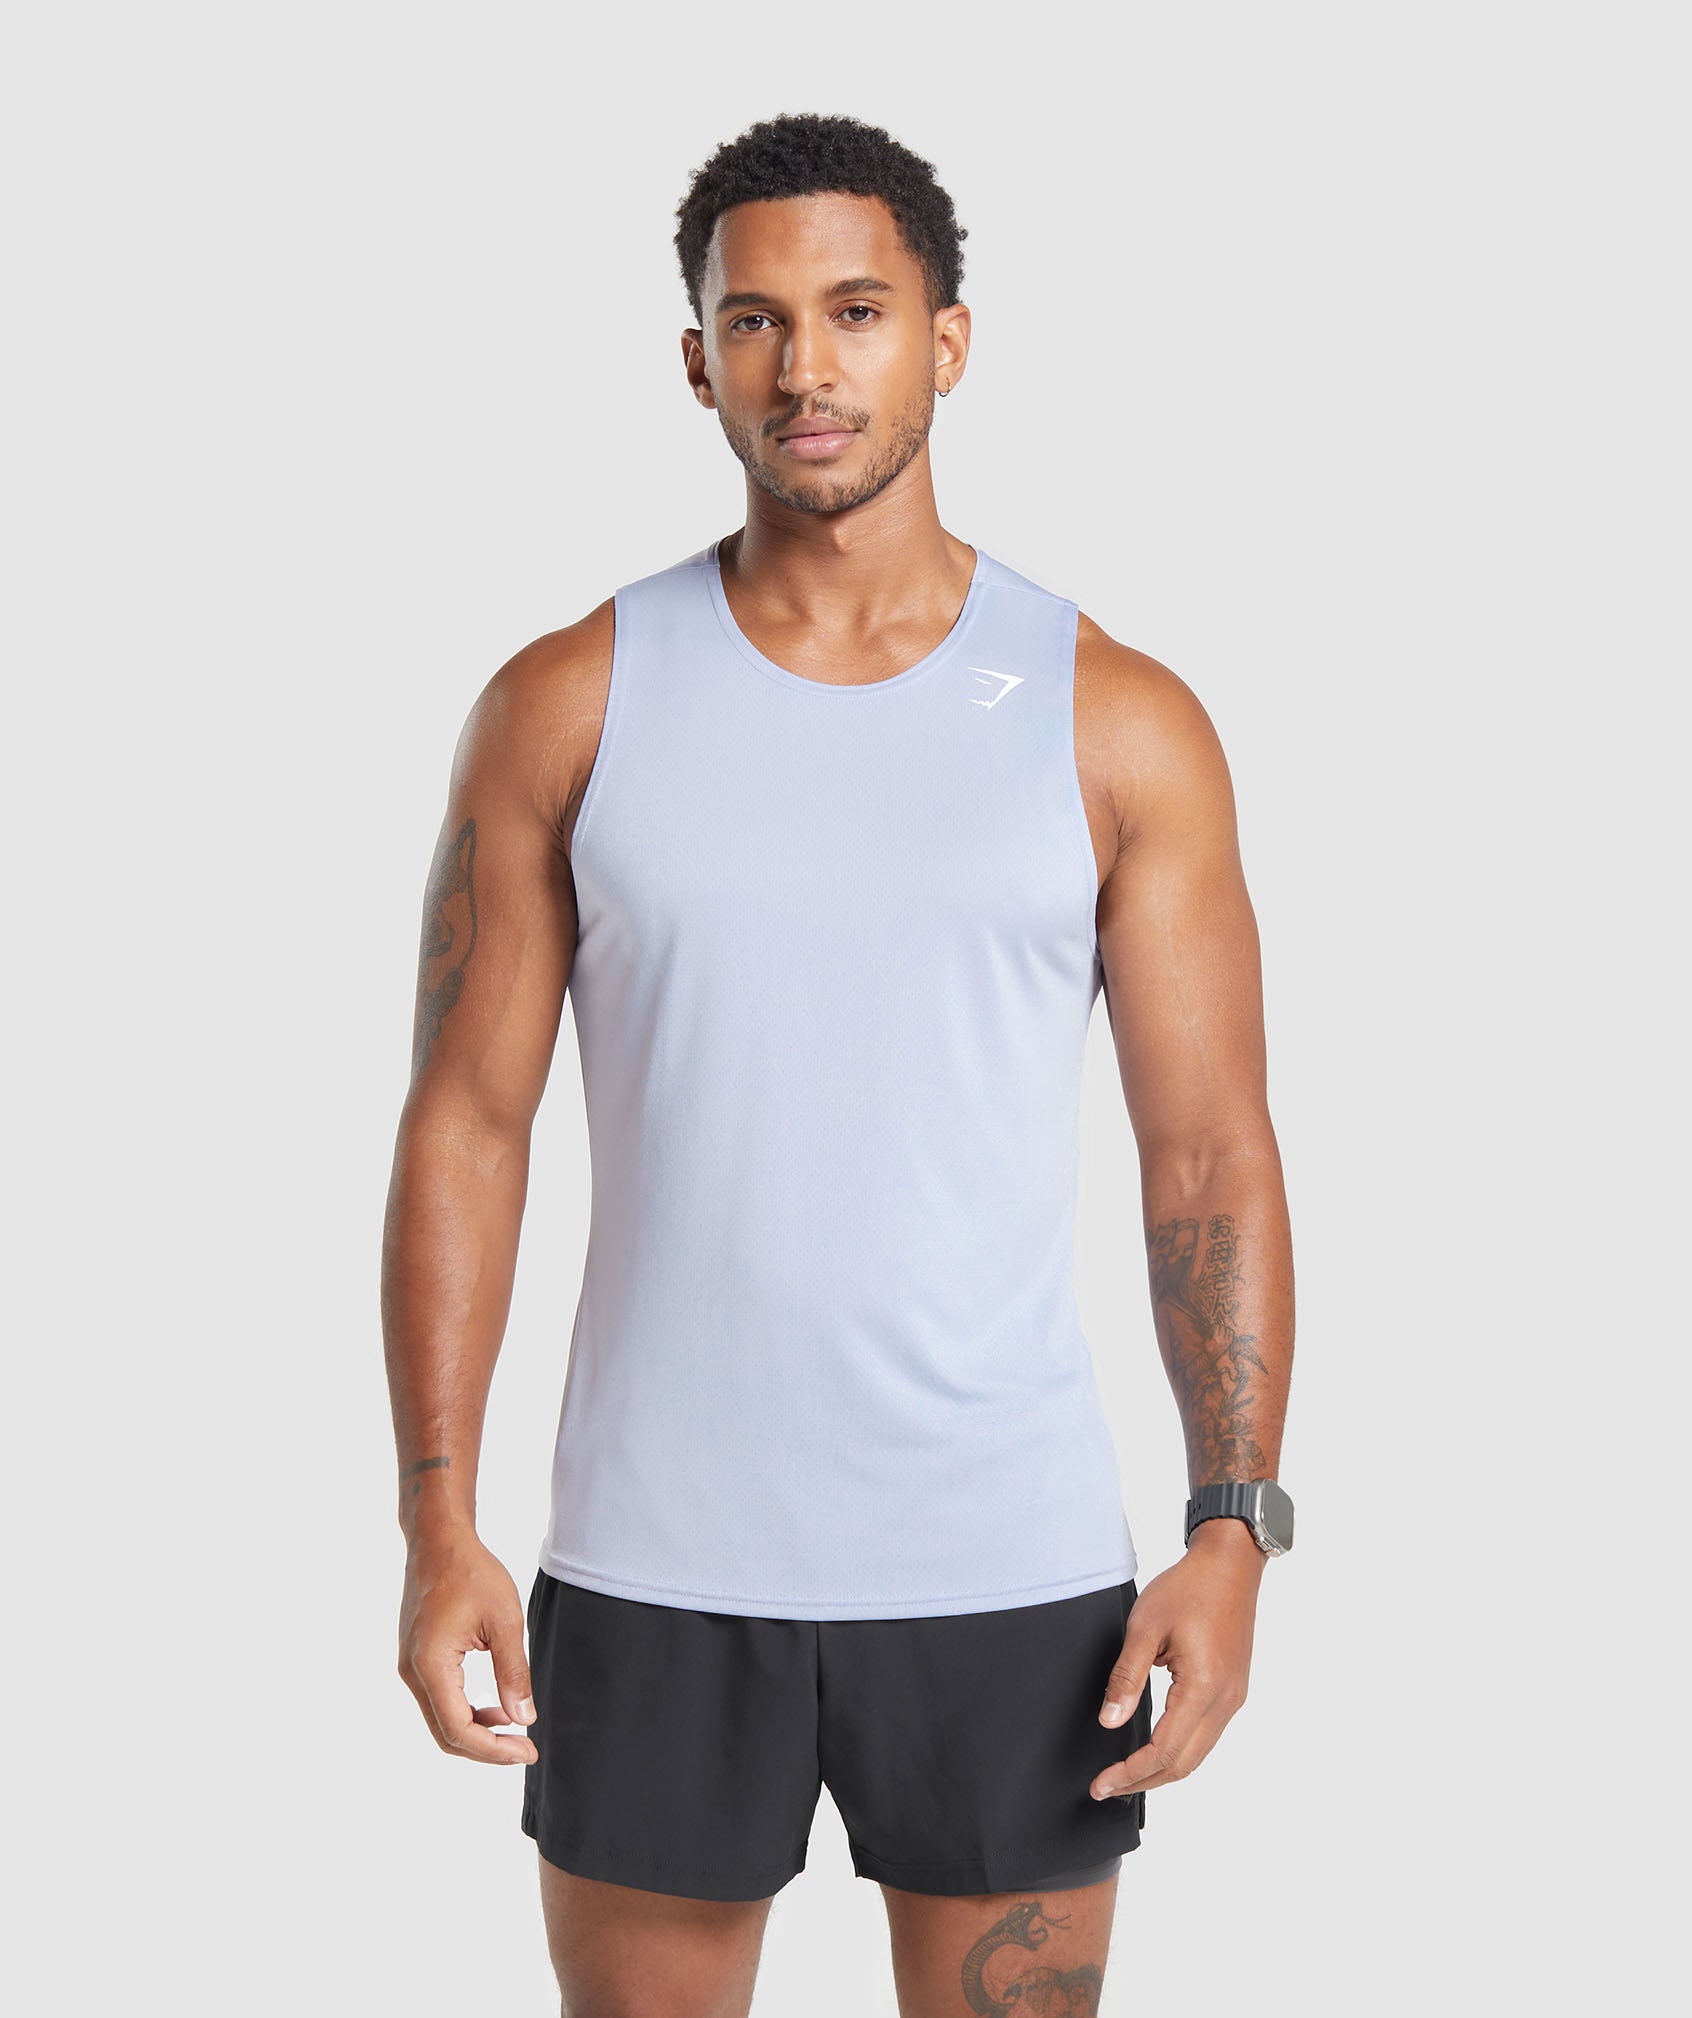 Arrival Tank in {{variantColor} is out of stock